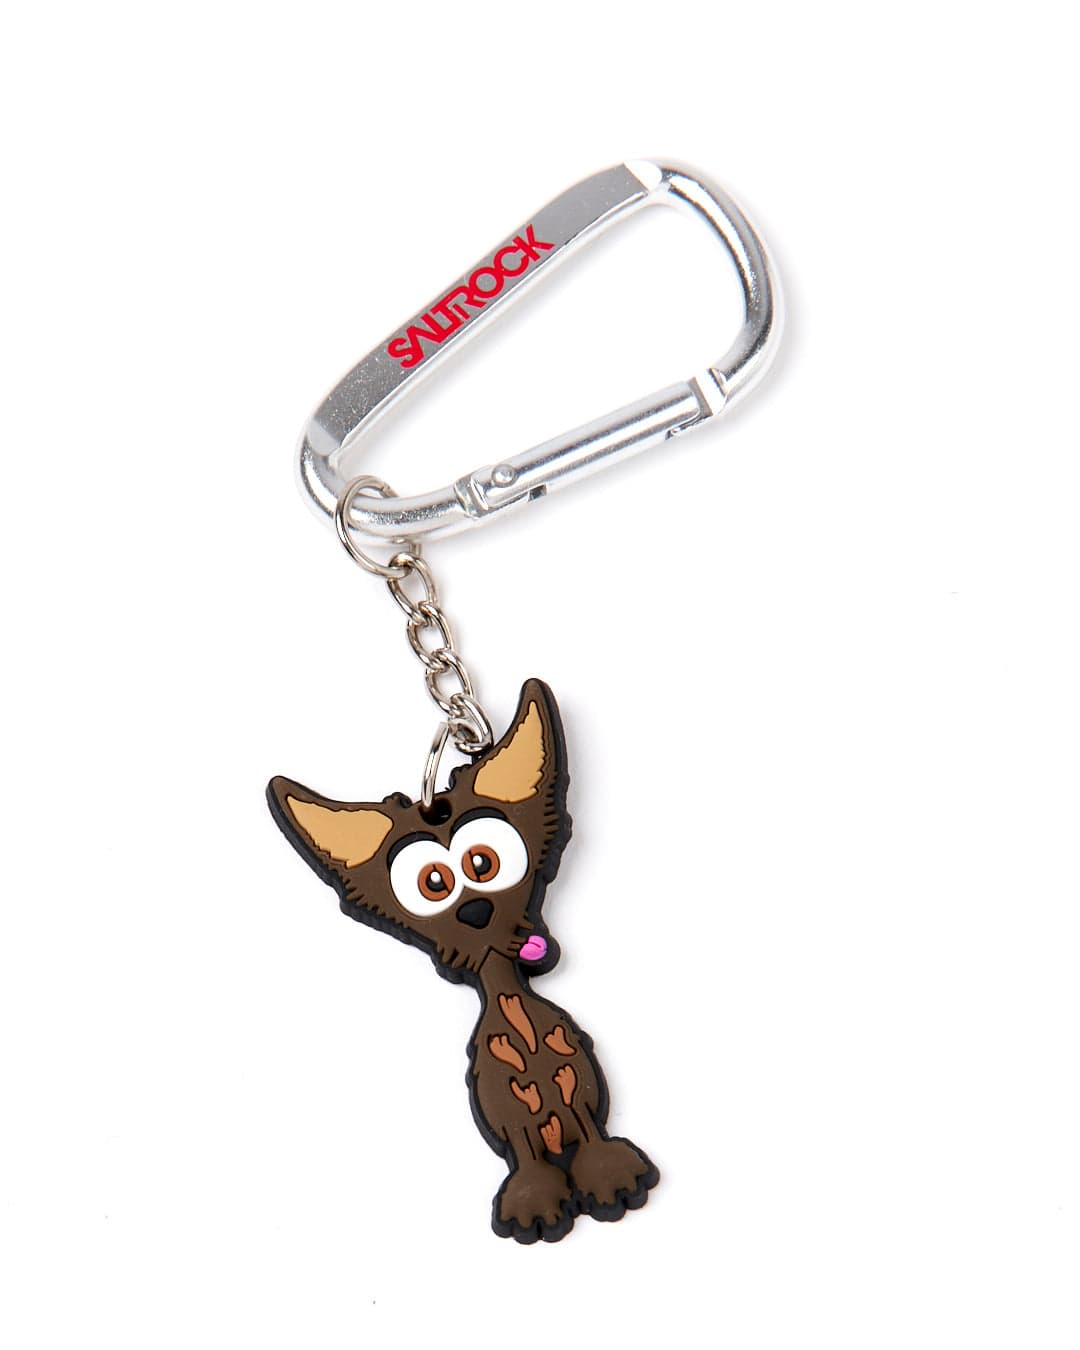 A black and brown chihuahua Jack Keyring carabiner featuring a dog by Saltrock.